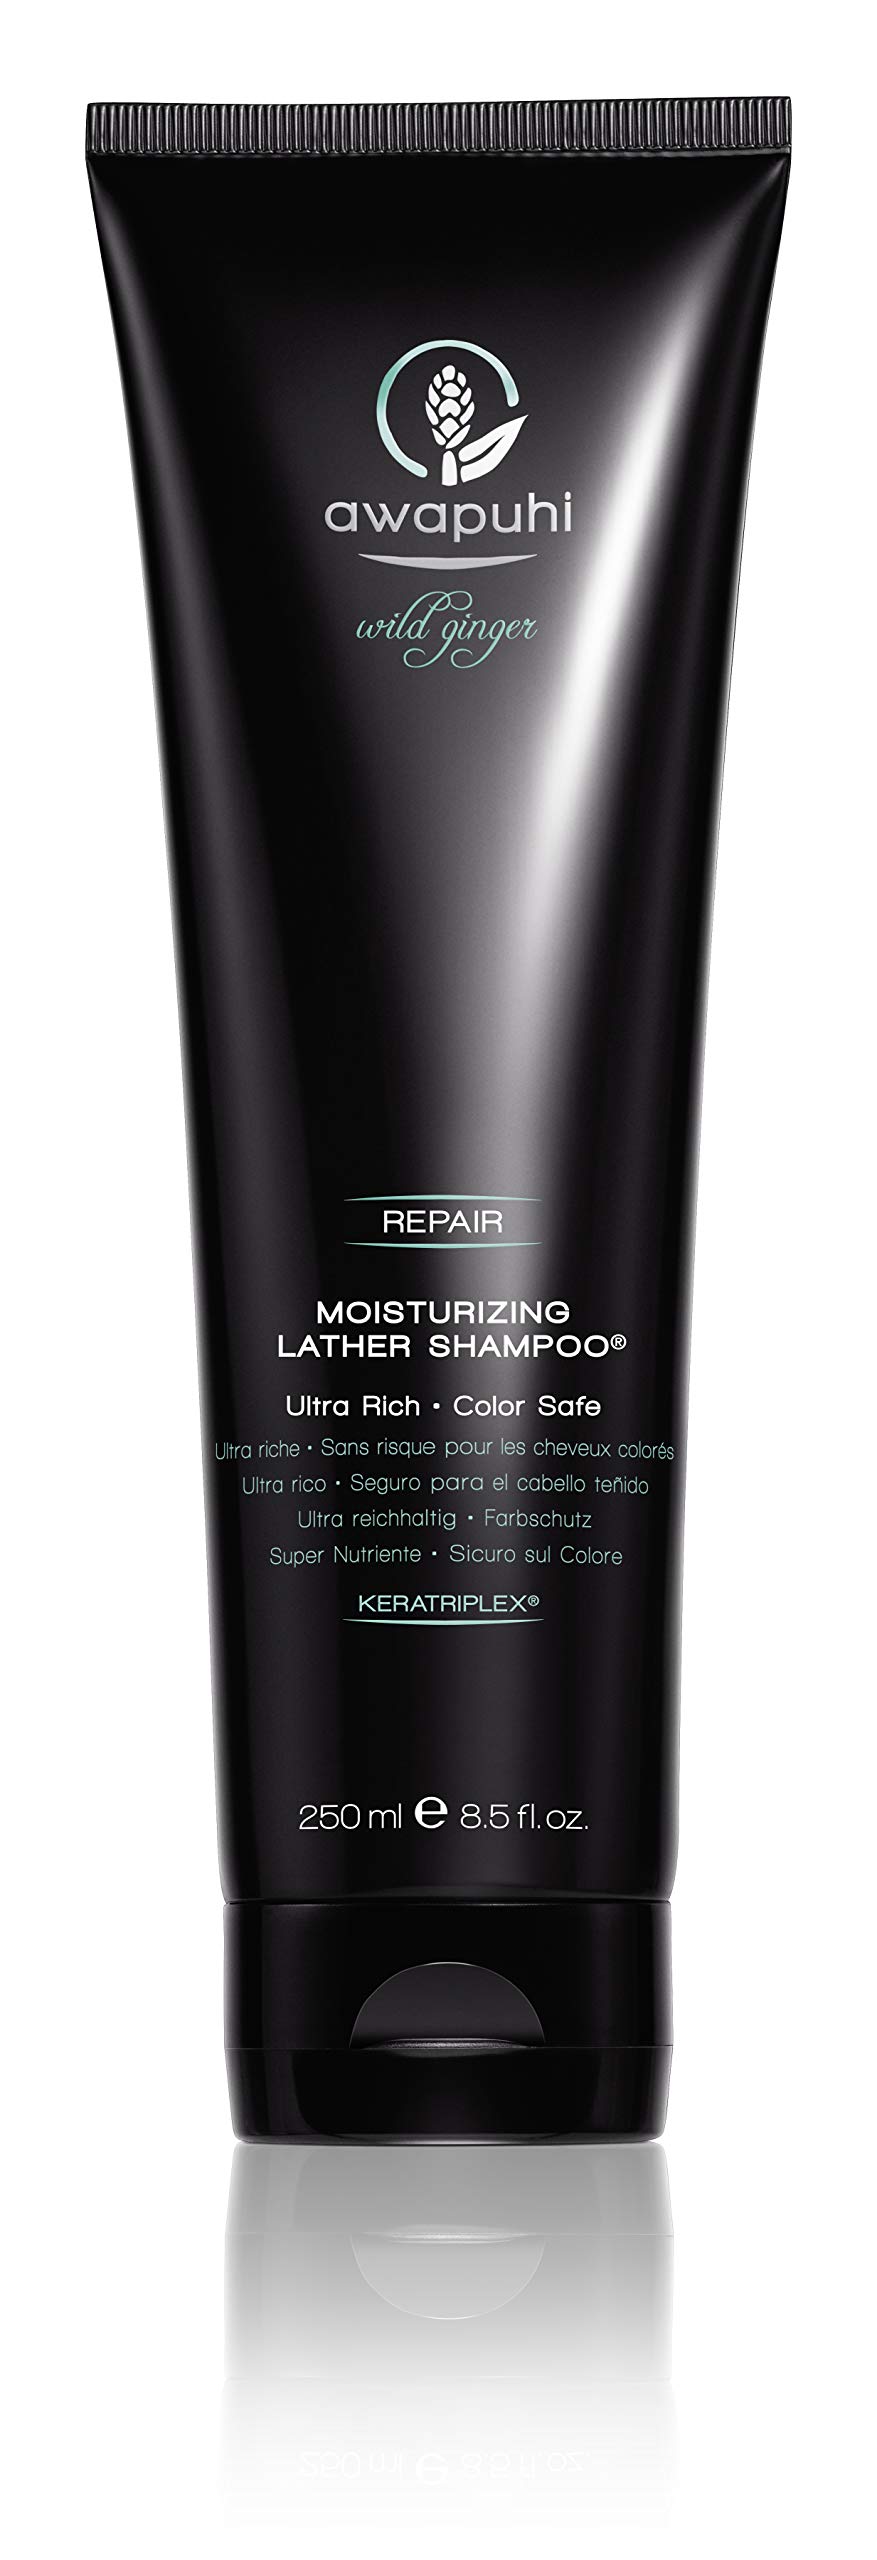 Awapuhi Wild Ginger by Paul Mitchell Nourishing Moisturizing Lather Shampoo, Ultra Rich, Color-Safe Formula, For Dry, Damaged + Color-Treated Hair